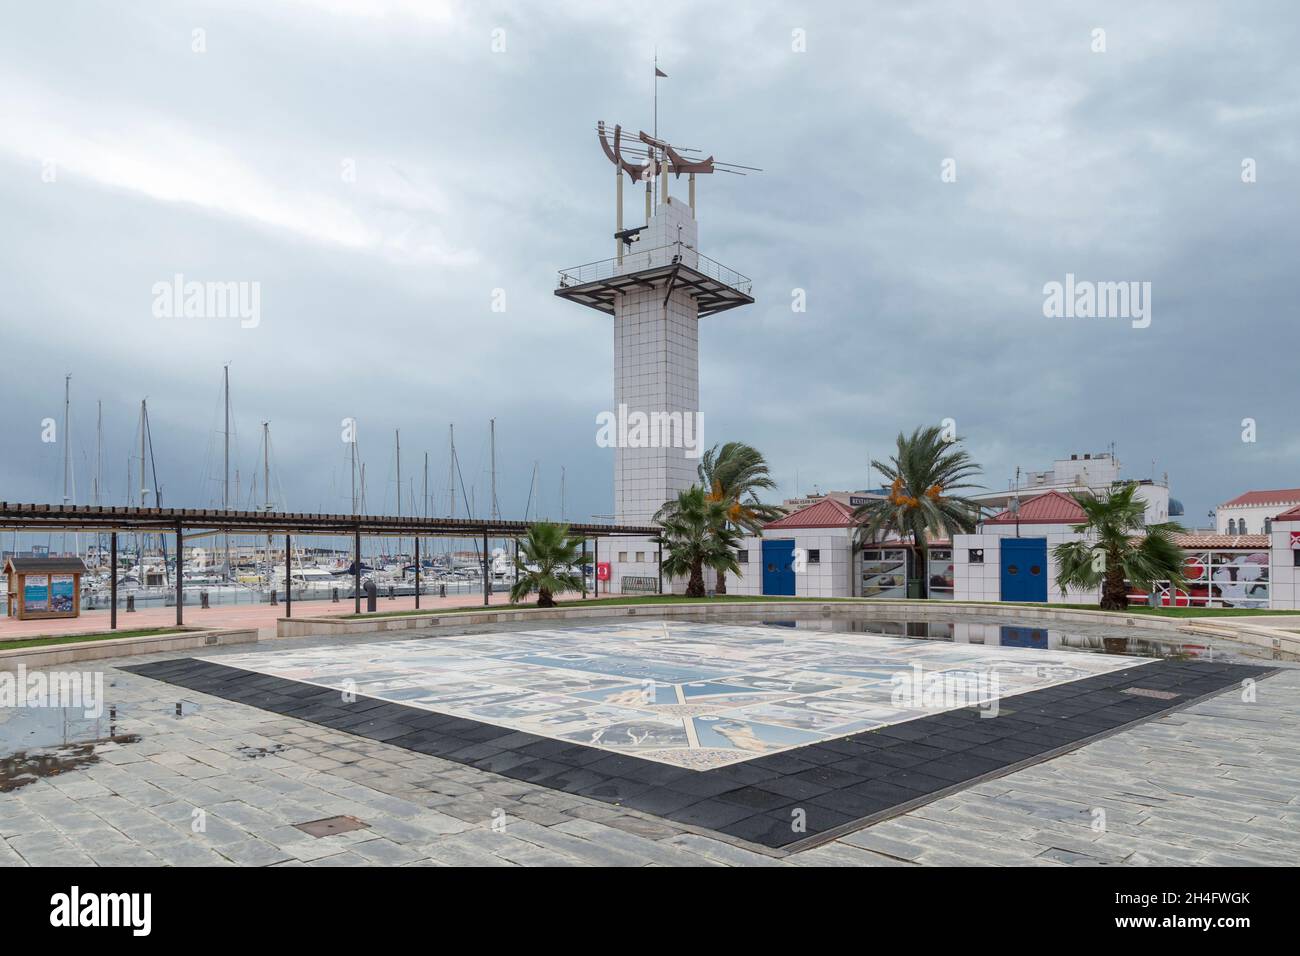 partial view of the grau of Castellón de la Plana, mosaic in the foreground and the promenade of the port with the rectangular tower, Spain Stock Photo